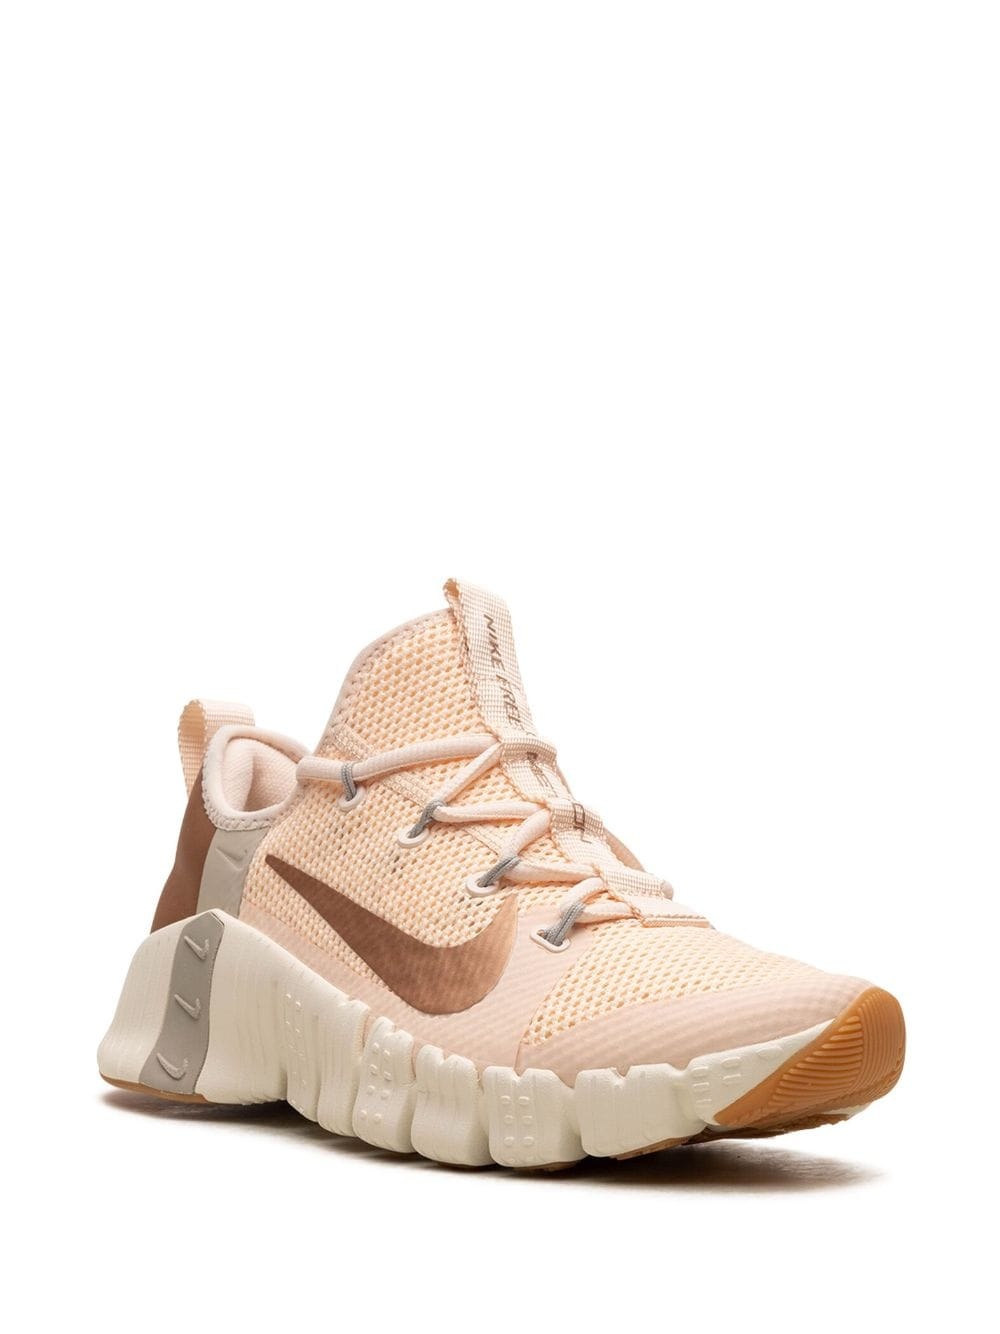 Free Metcon 3 "Guava Ice" sneakers - 2